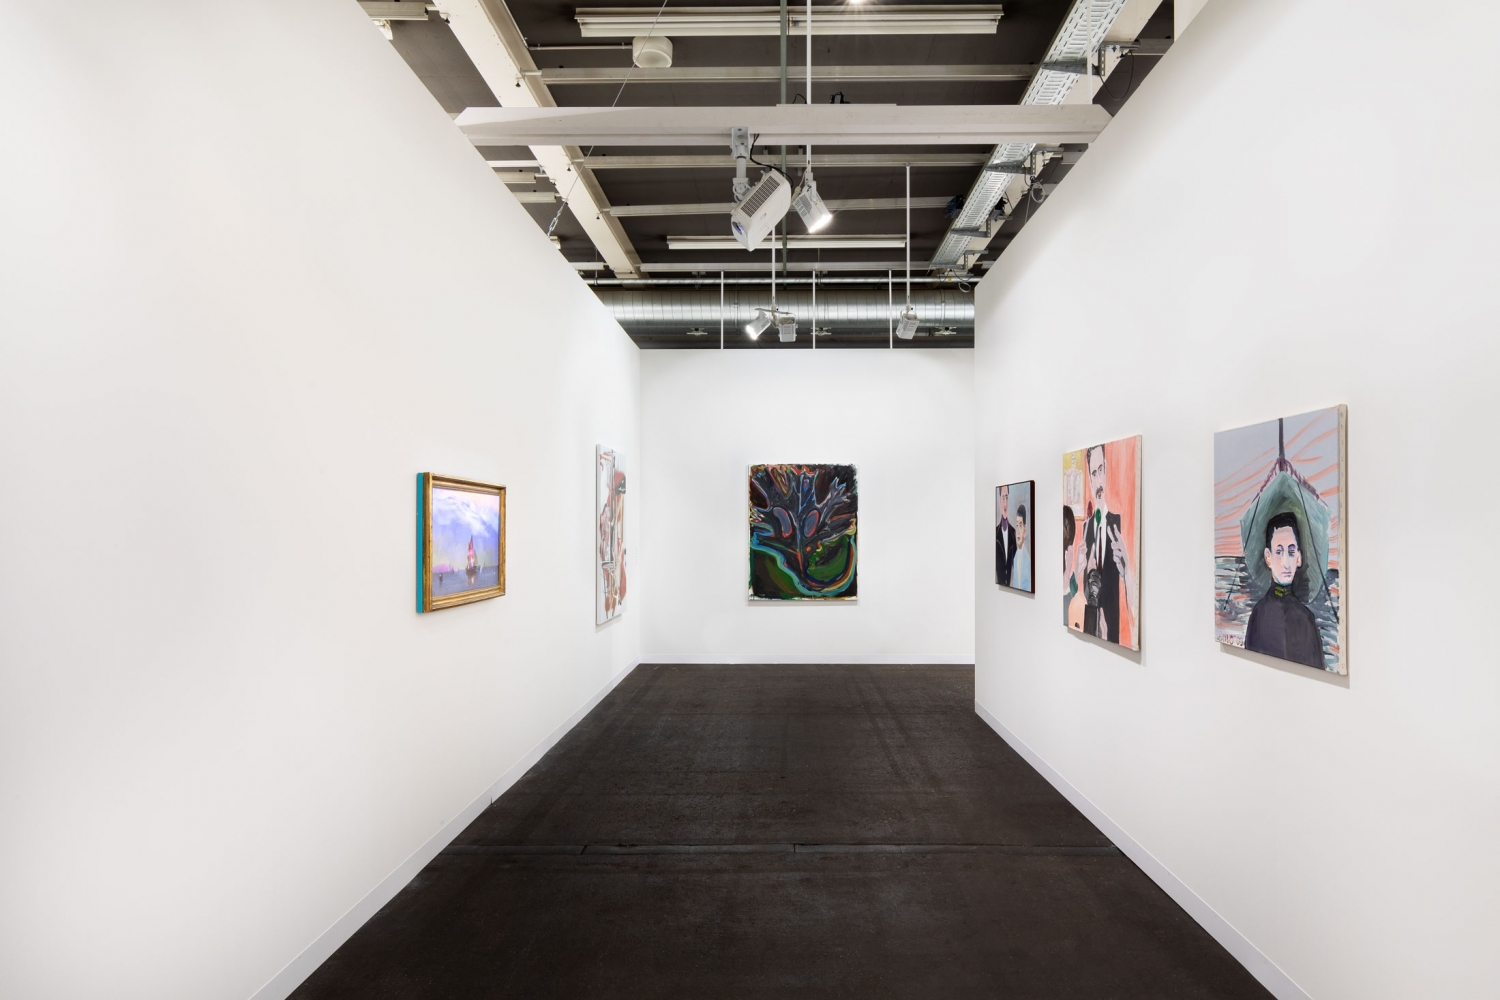 Luhring Augustine

Art Basel, Booth A3

Installation view

2019

Pictured from left: Pipilotti Rist, Jeff Elrod, Josh Smith, Emo Verkerk